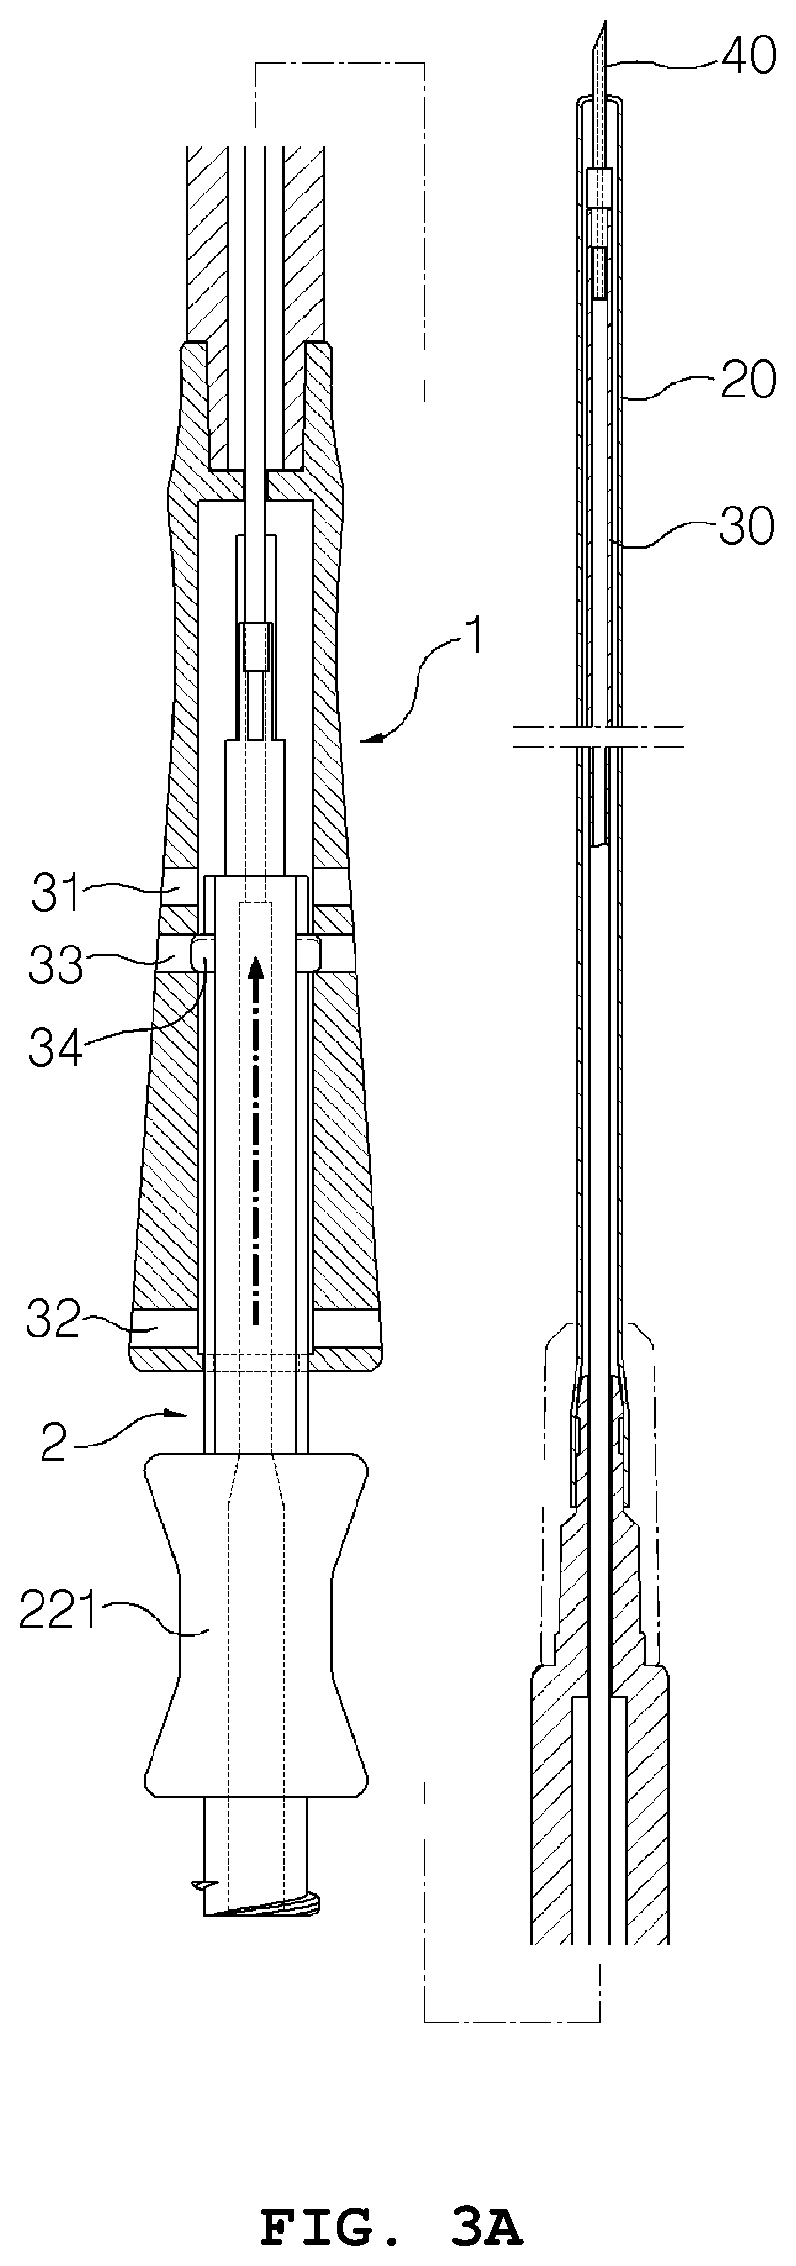 Endoscopic treatment instrument having an inner and outer tube